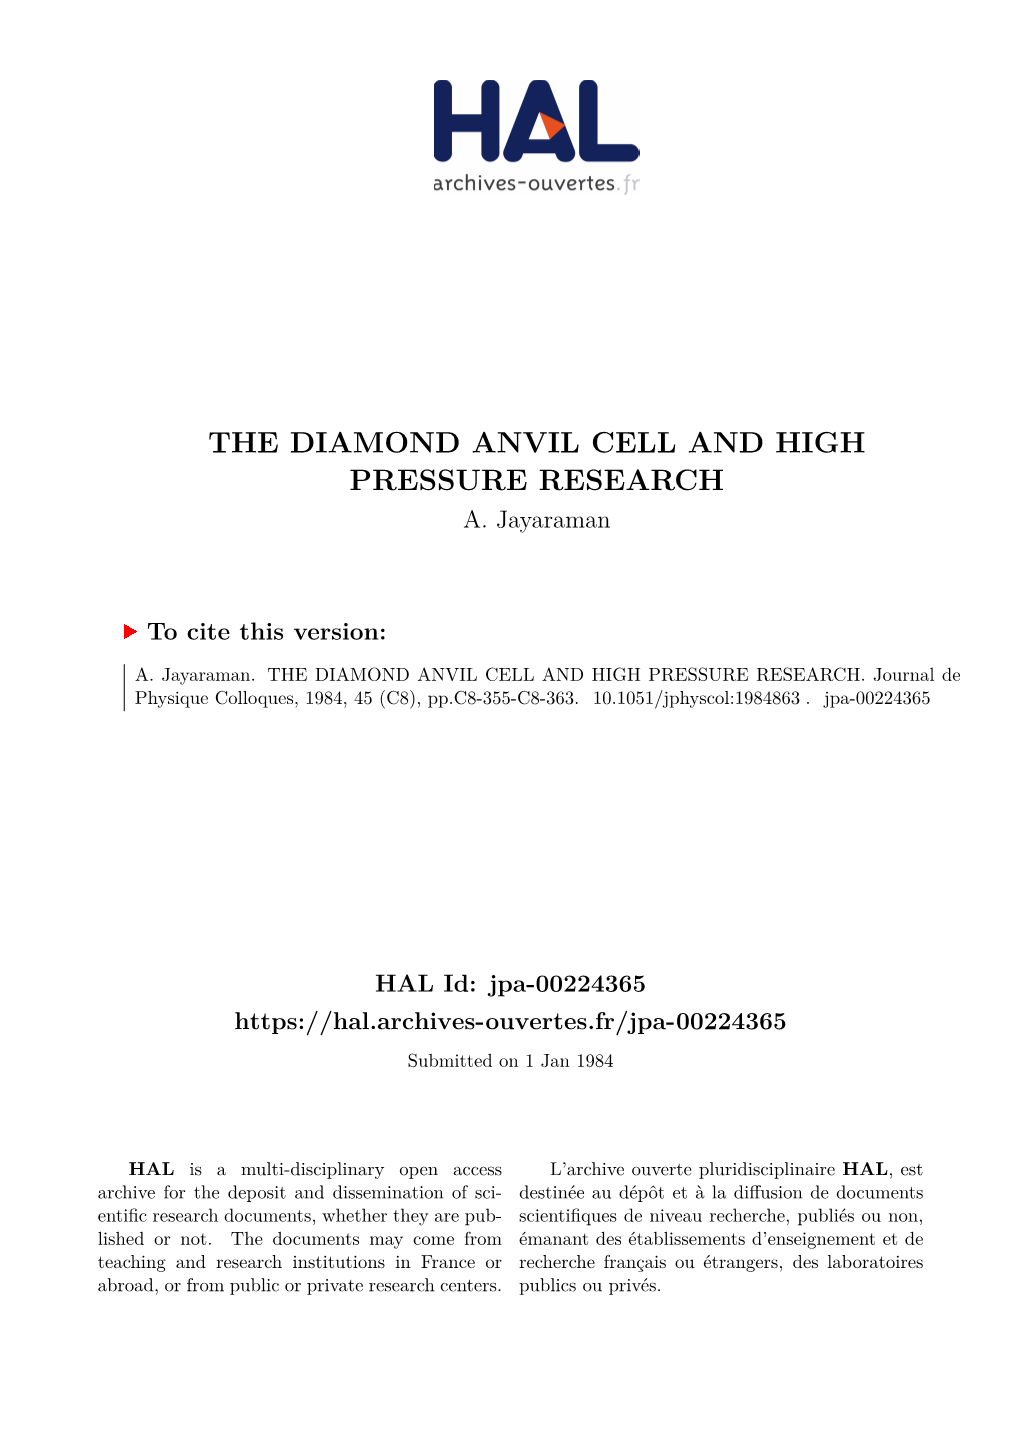 The Diamond Anvil Cell and High Pressure Research A